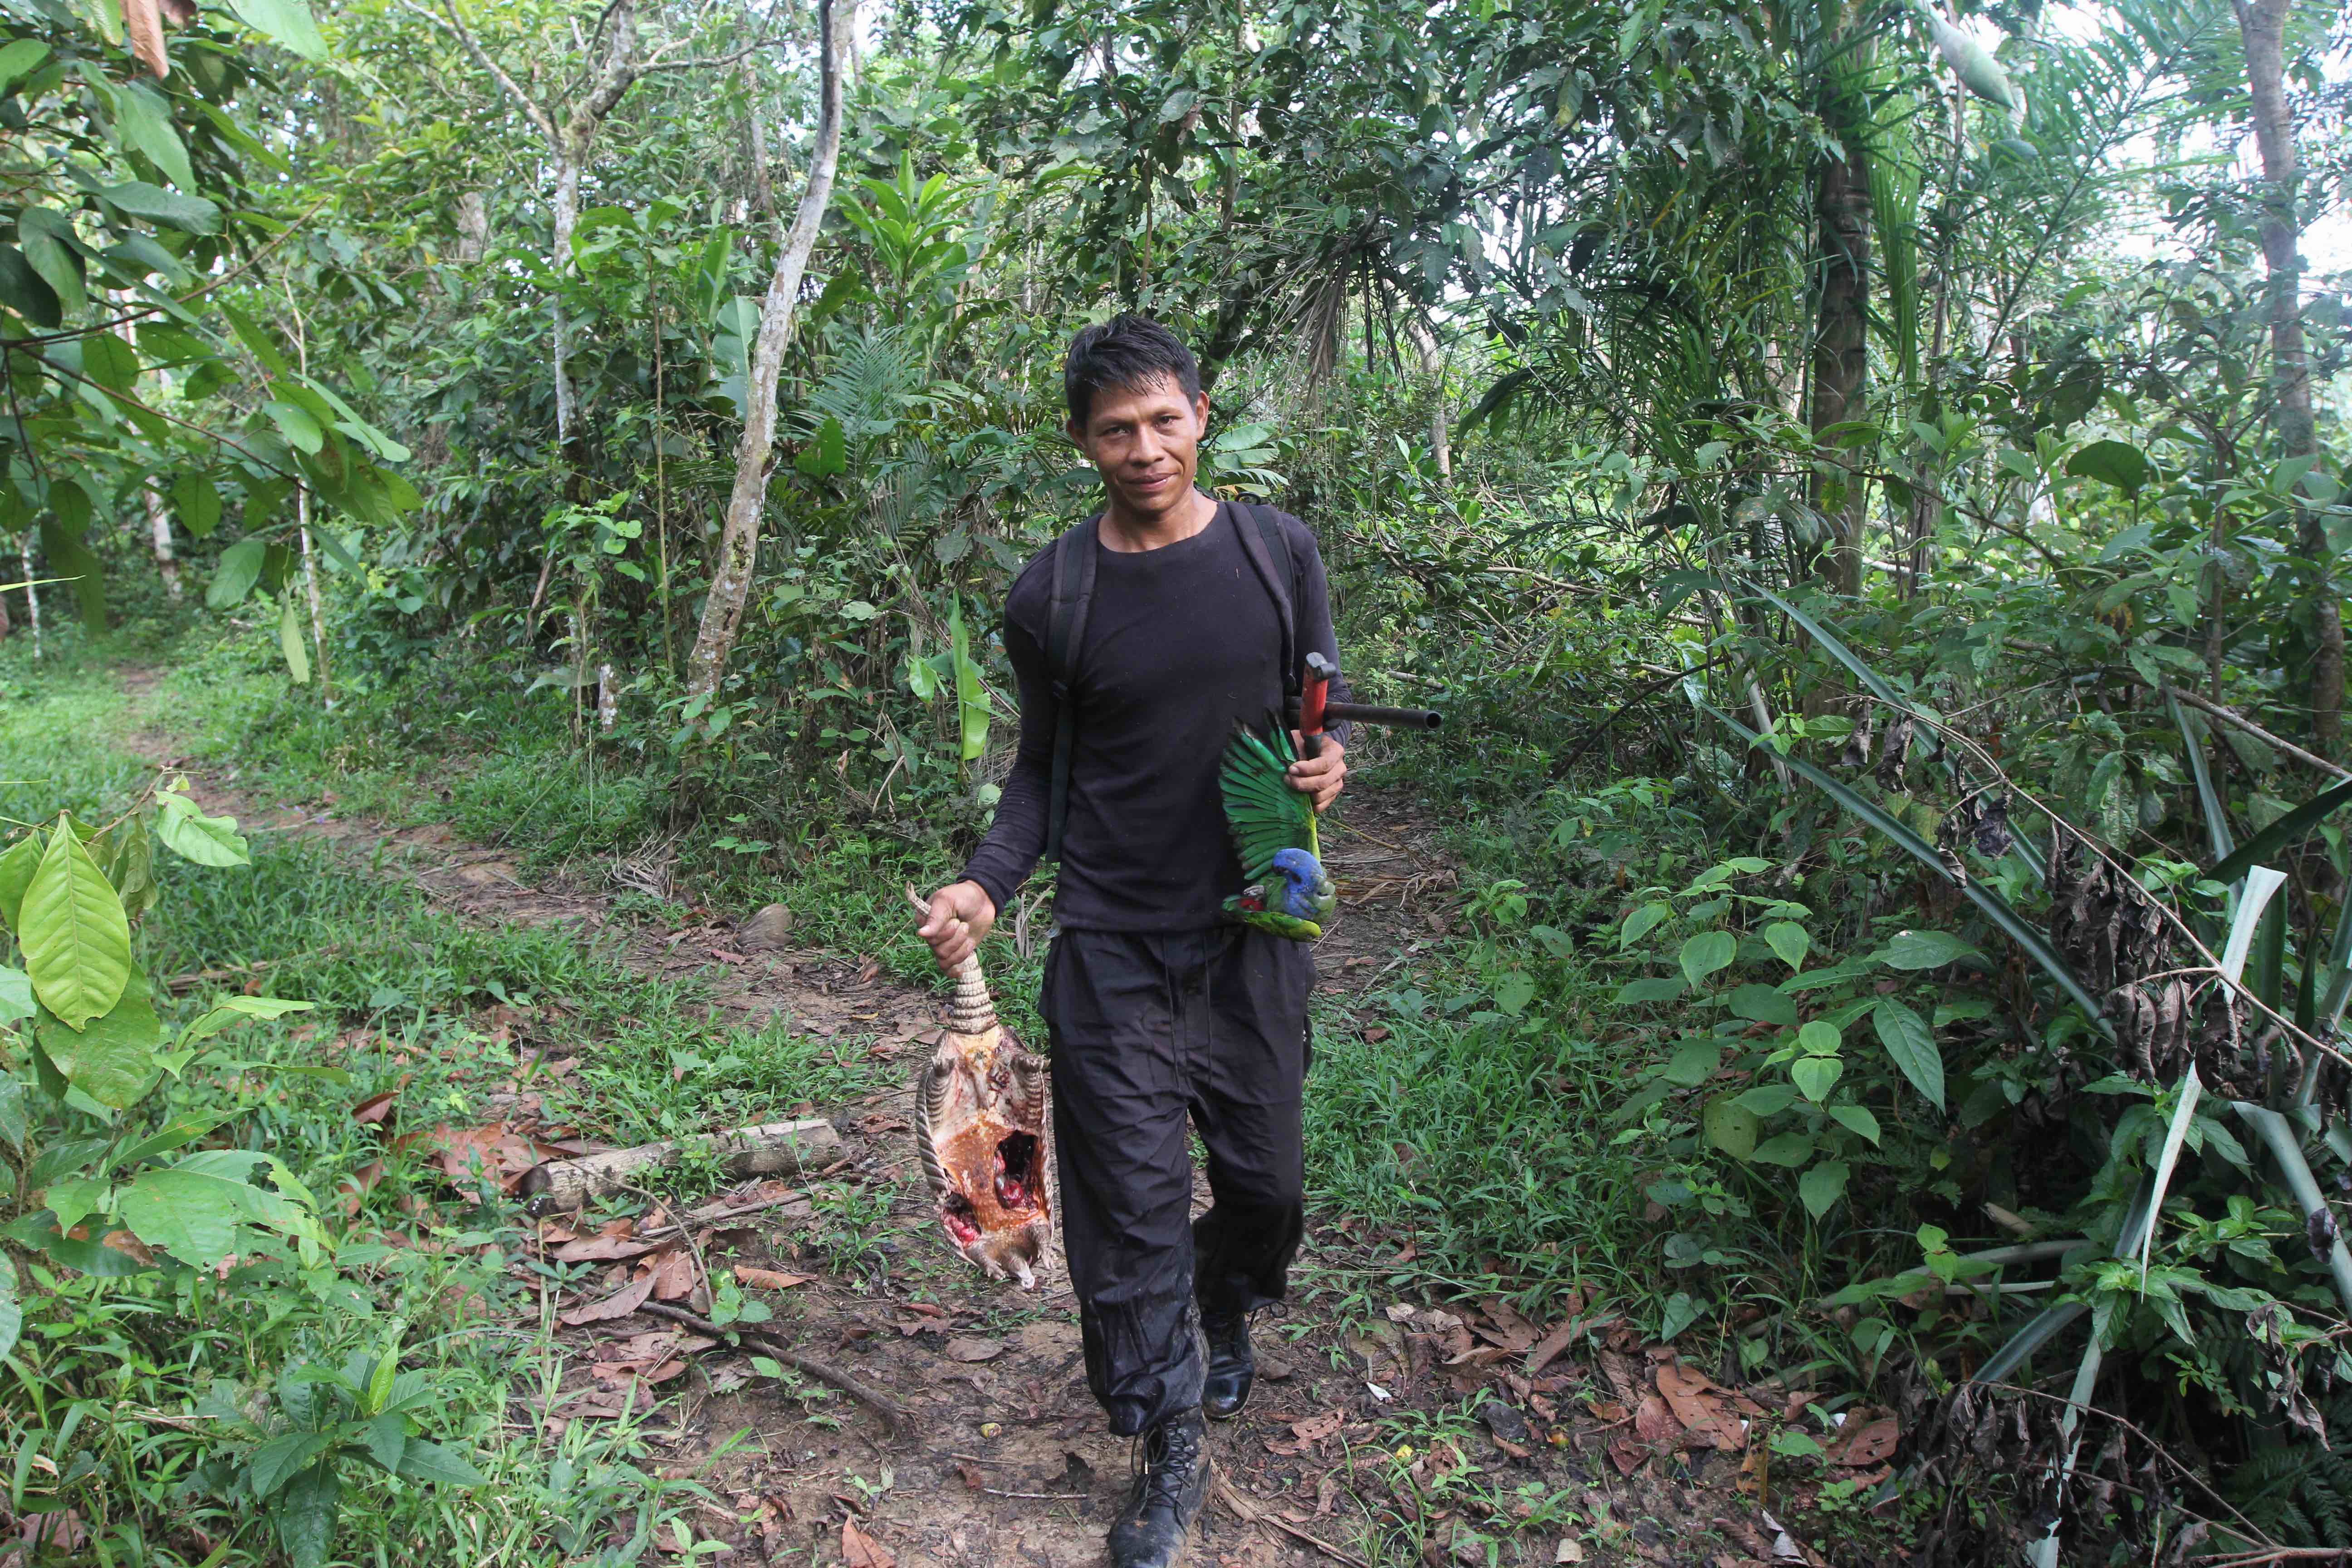 Hunter Diomedes Silva returns home from an early-morning check of his traps, carrying an armadillo and a parrot. Photo: Barbara Fraser/CIFOR.